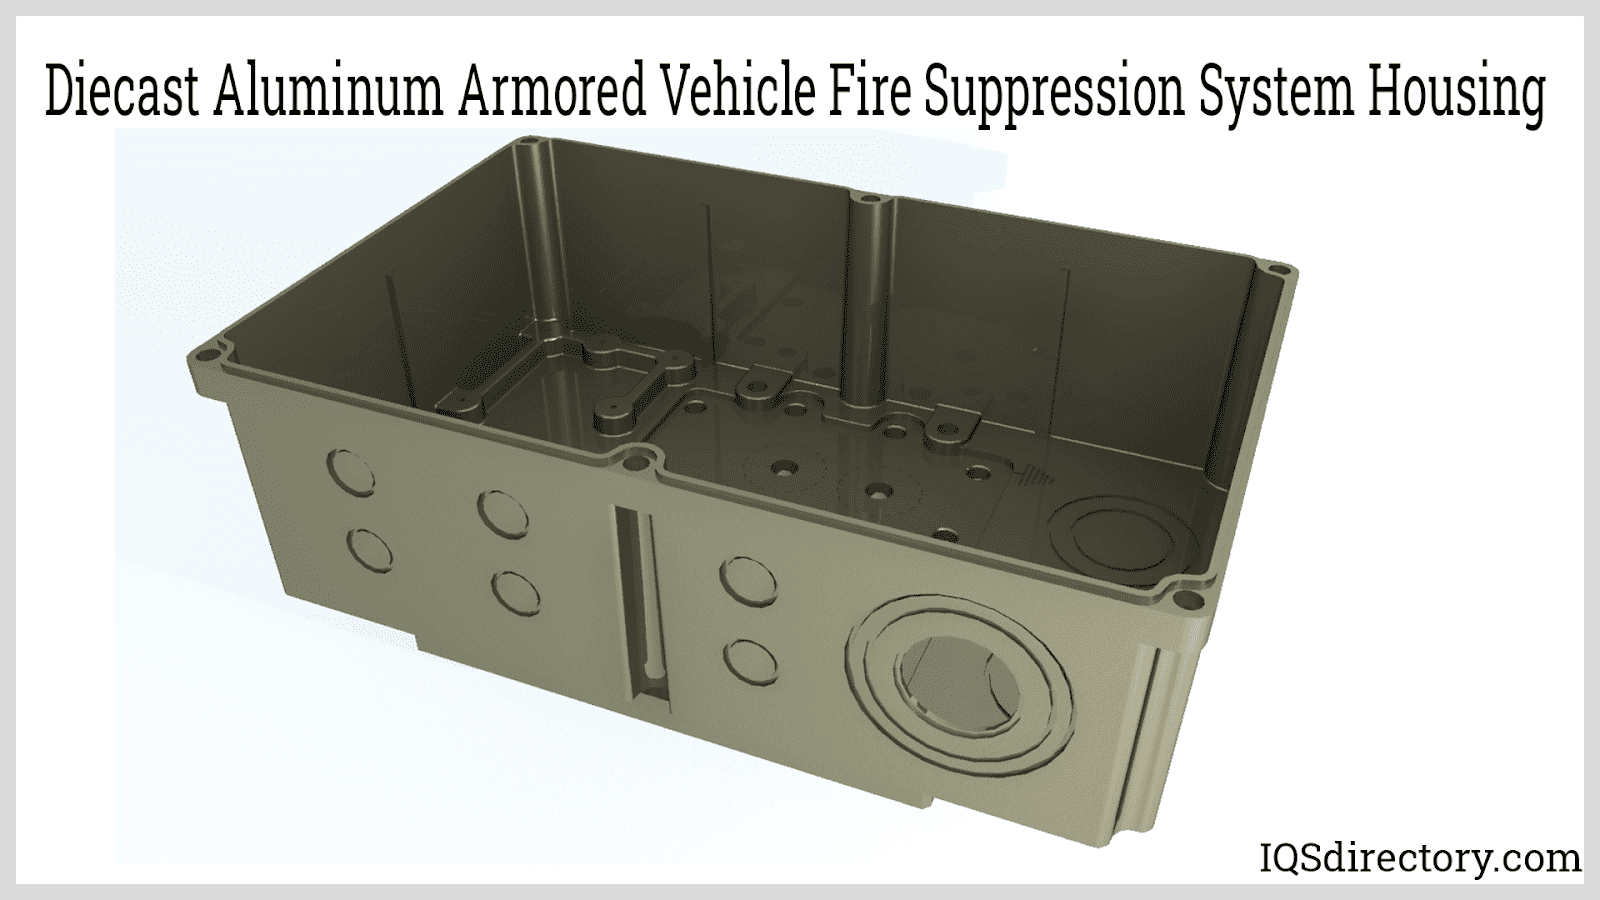 Diecast Aluminum Armored Vehicle Fire Suppression System Housing